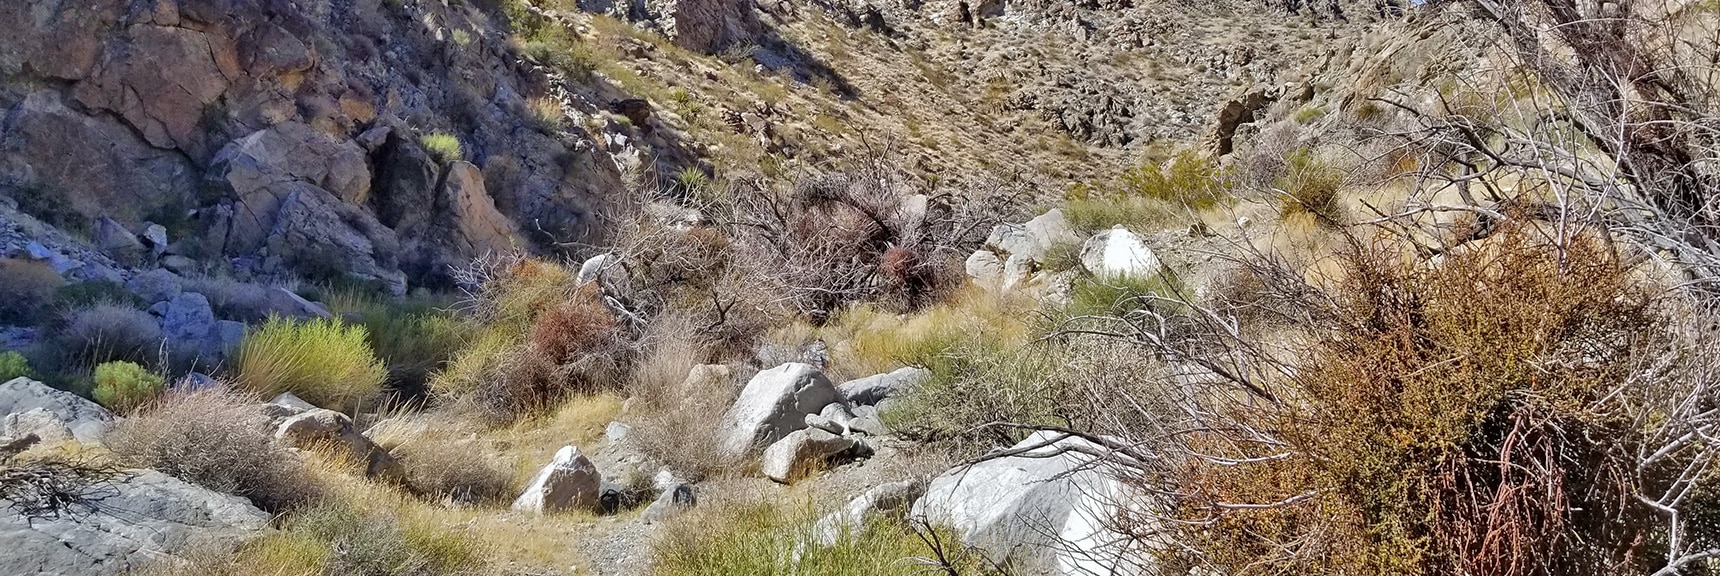 Lots of Rocks and Brush to Navigate in Horse Thief Canyon | Horse Thief Canyon Loop | Mt. Wilson | Black Mountains | Lake Mead National Recreation Area, Arizona